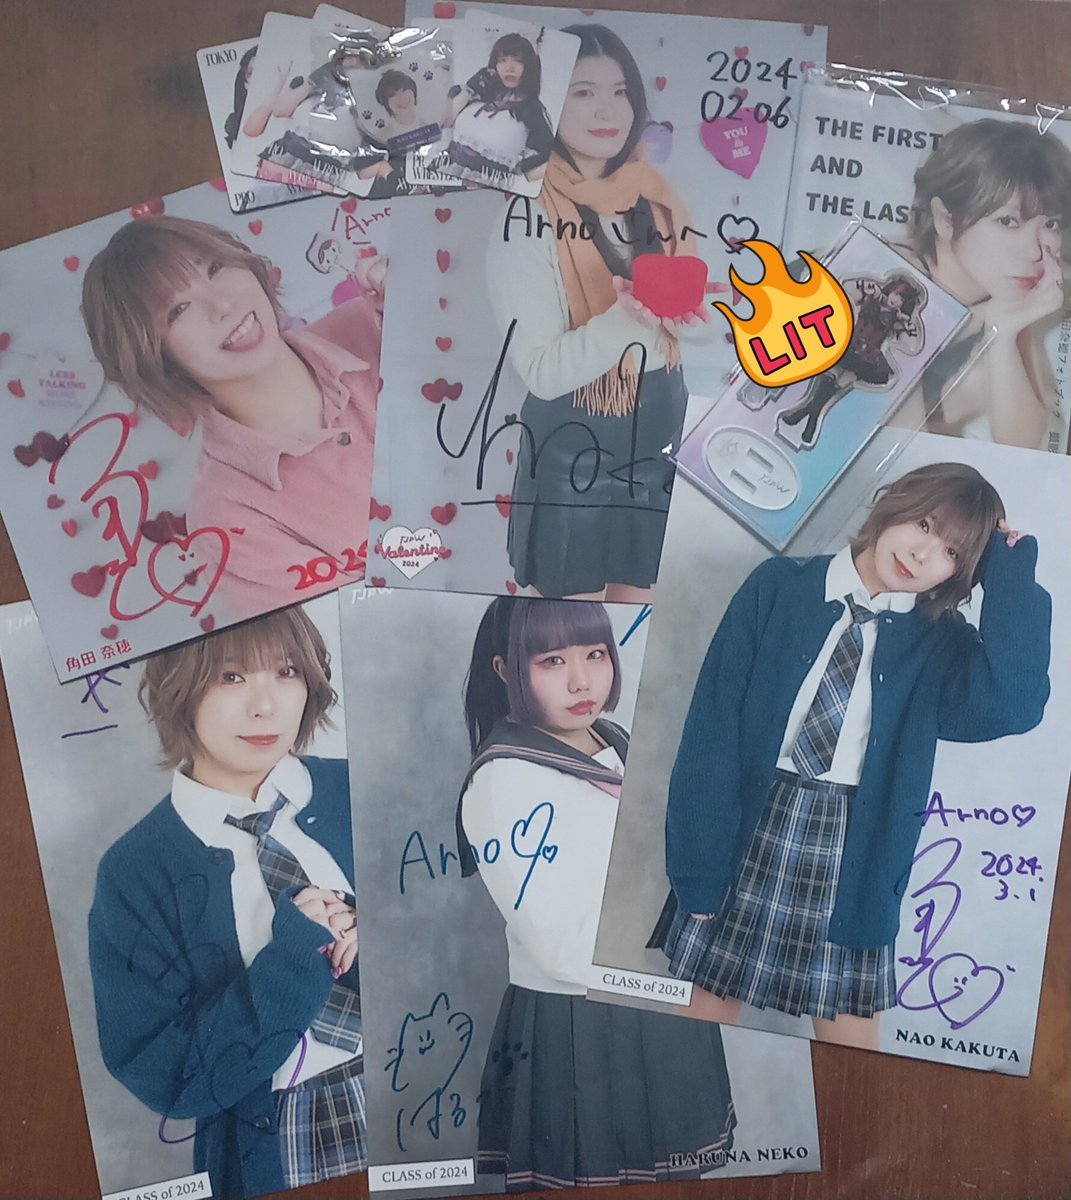 So a bunch of stuff arrived today! 😄

猫はるな, 宮本もか, 角田奈穂, ありがとうございました!

#猫はるな #宮本もか #角田奈穂 #tjpw